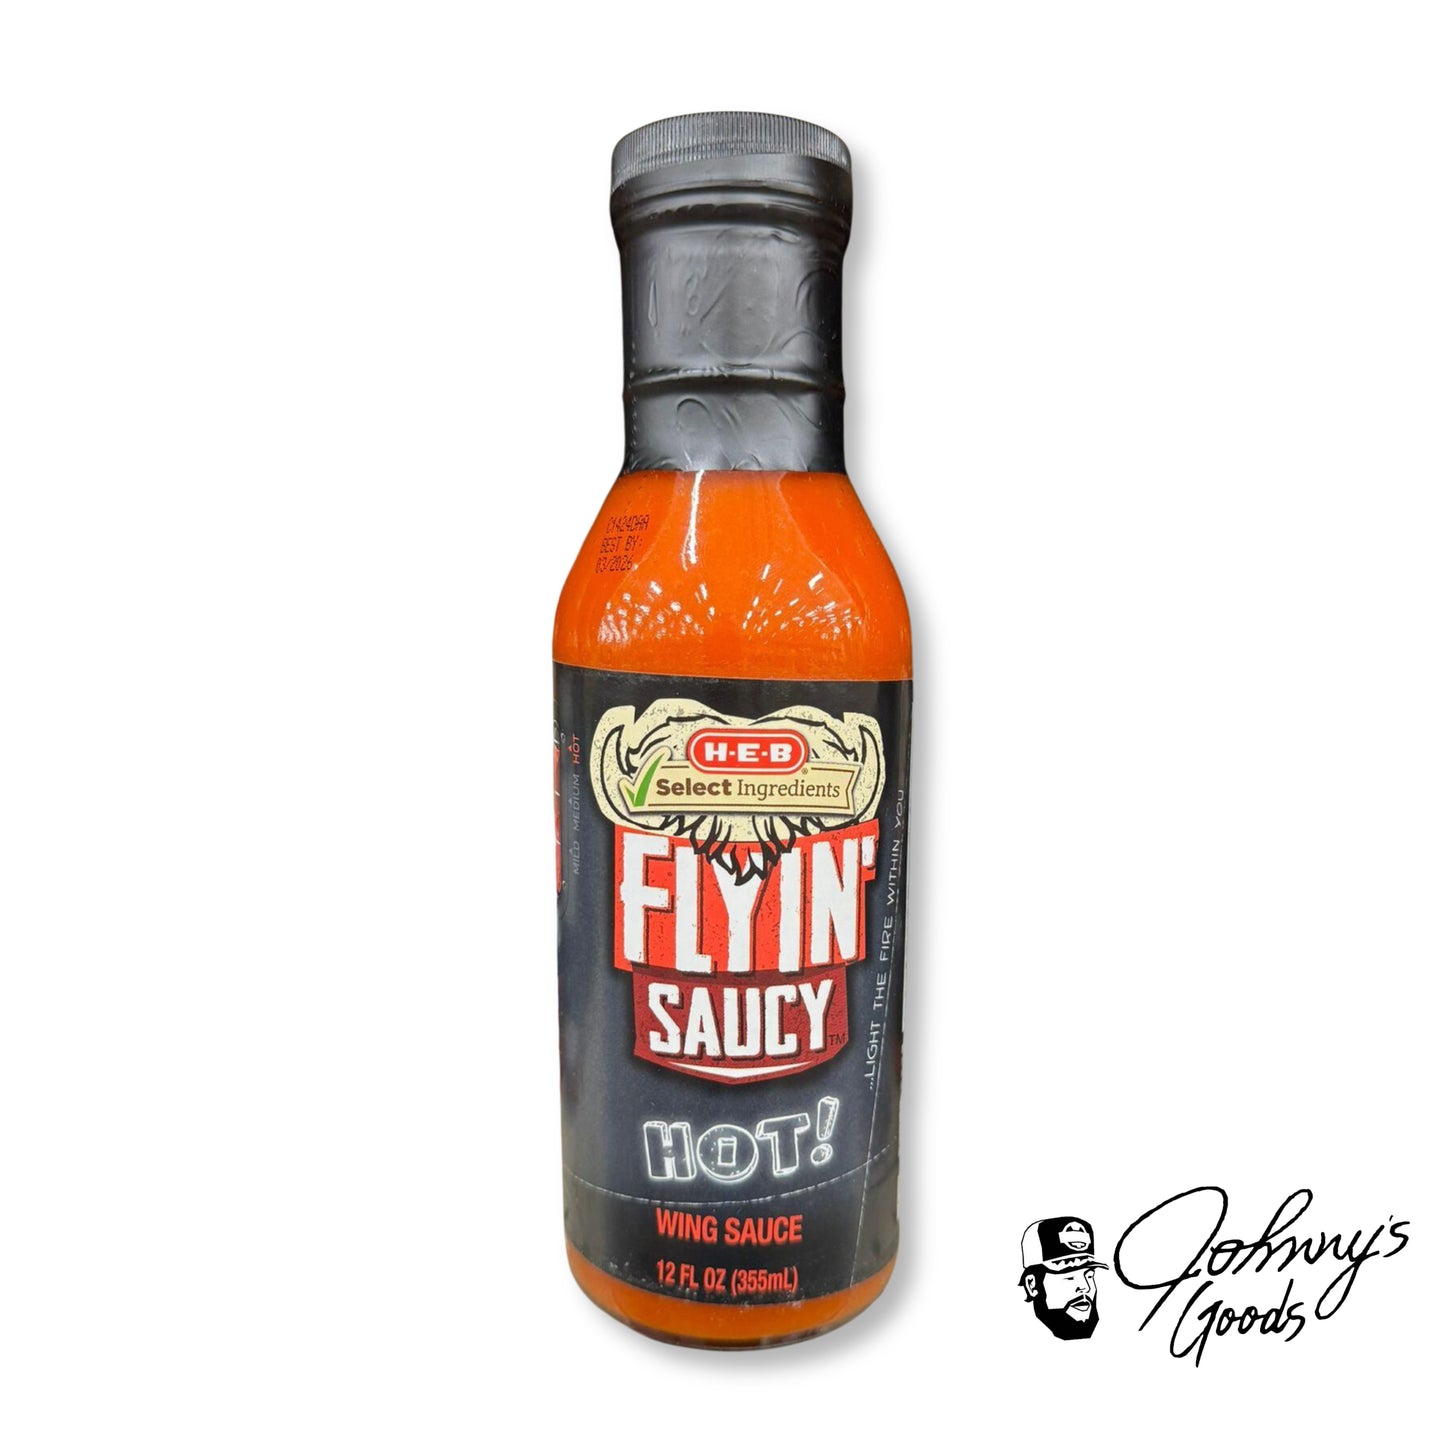 HEB Flyin' Saucy Wing Sauce h-e-b texas sauces hot heat wing sauces condiments flavors wings